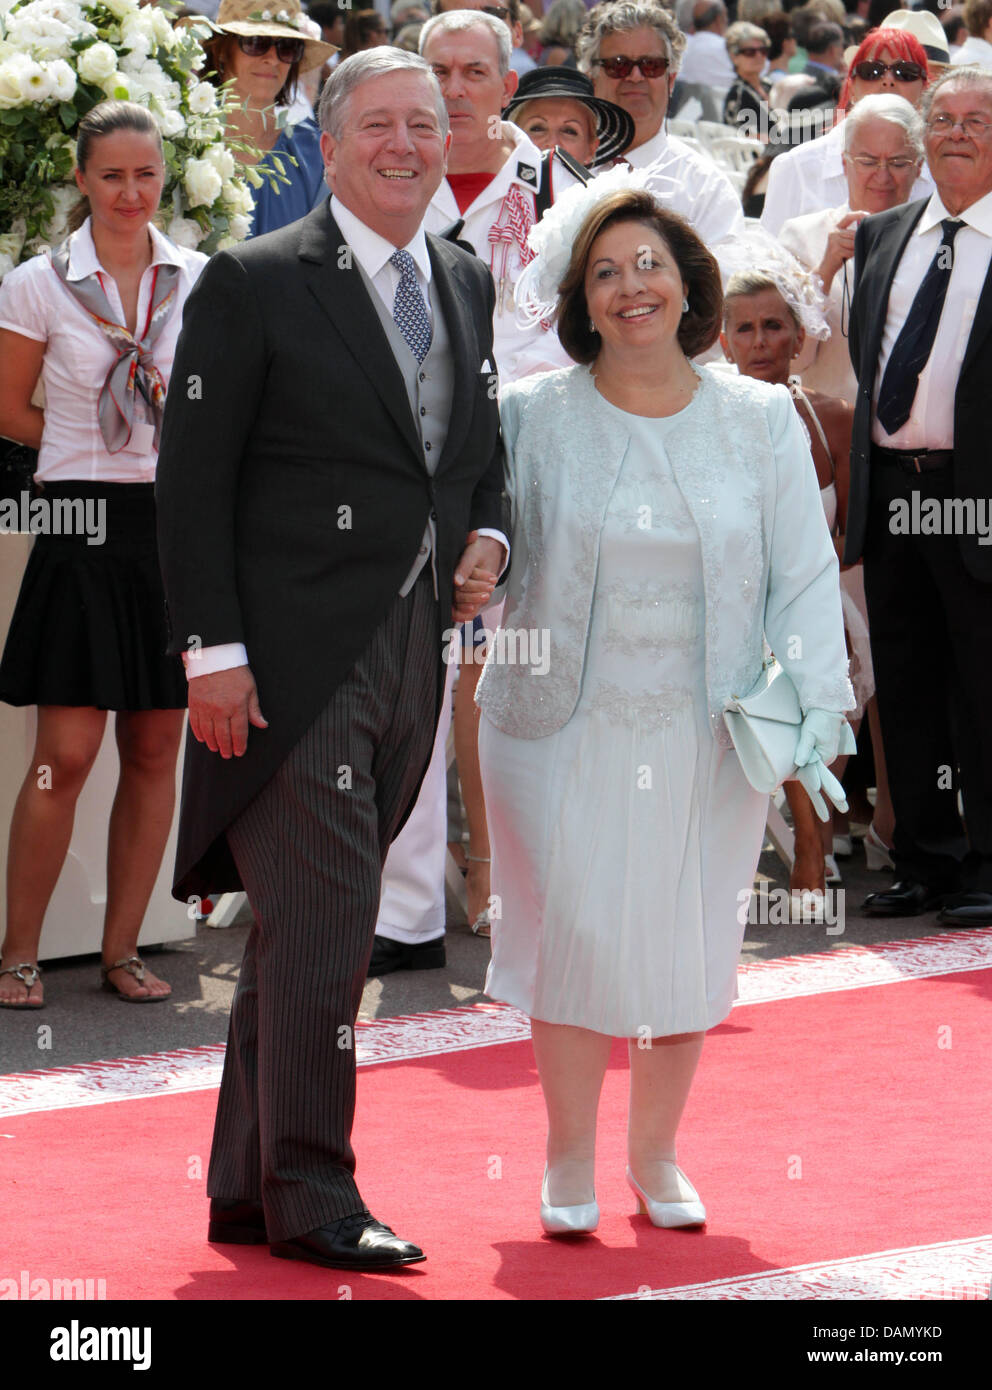 Crown Prince Aleksandar II. of Serbia with his wife Princess Katarina arrive for the religious wedding of Prince Albert II and Charlene Wittstock in the Prince's Palace in Monaco, 02 July 2011. Some 3500 guests are expected to follow the ceremony in the Main Courtyard of the Palace. Photo: Albert Nieboer Stock Photo